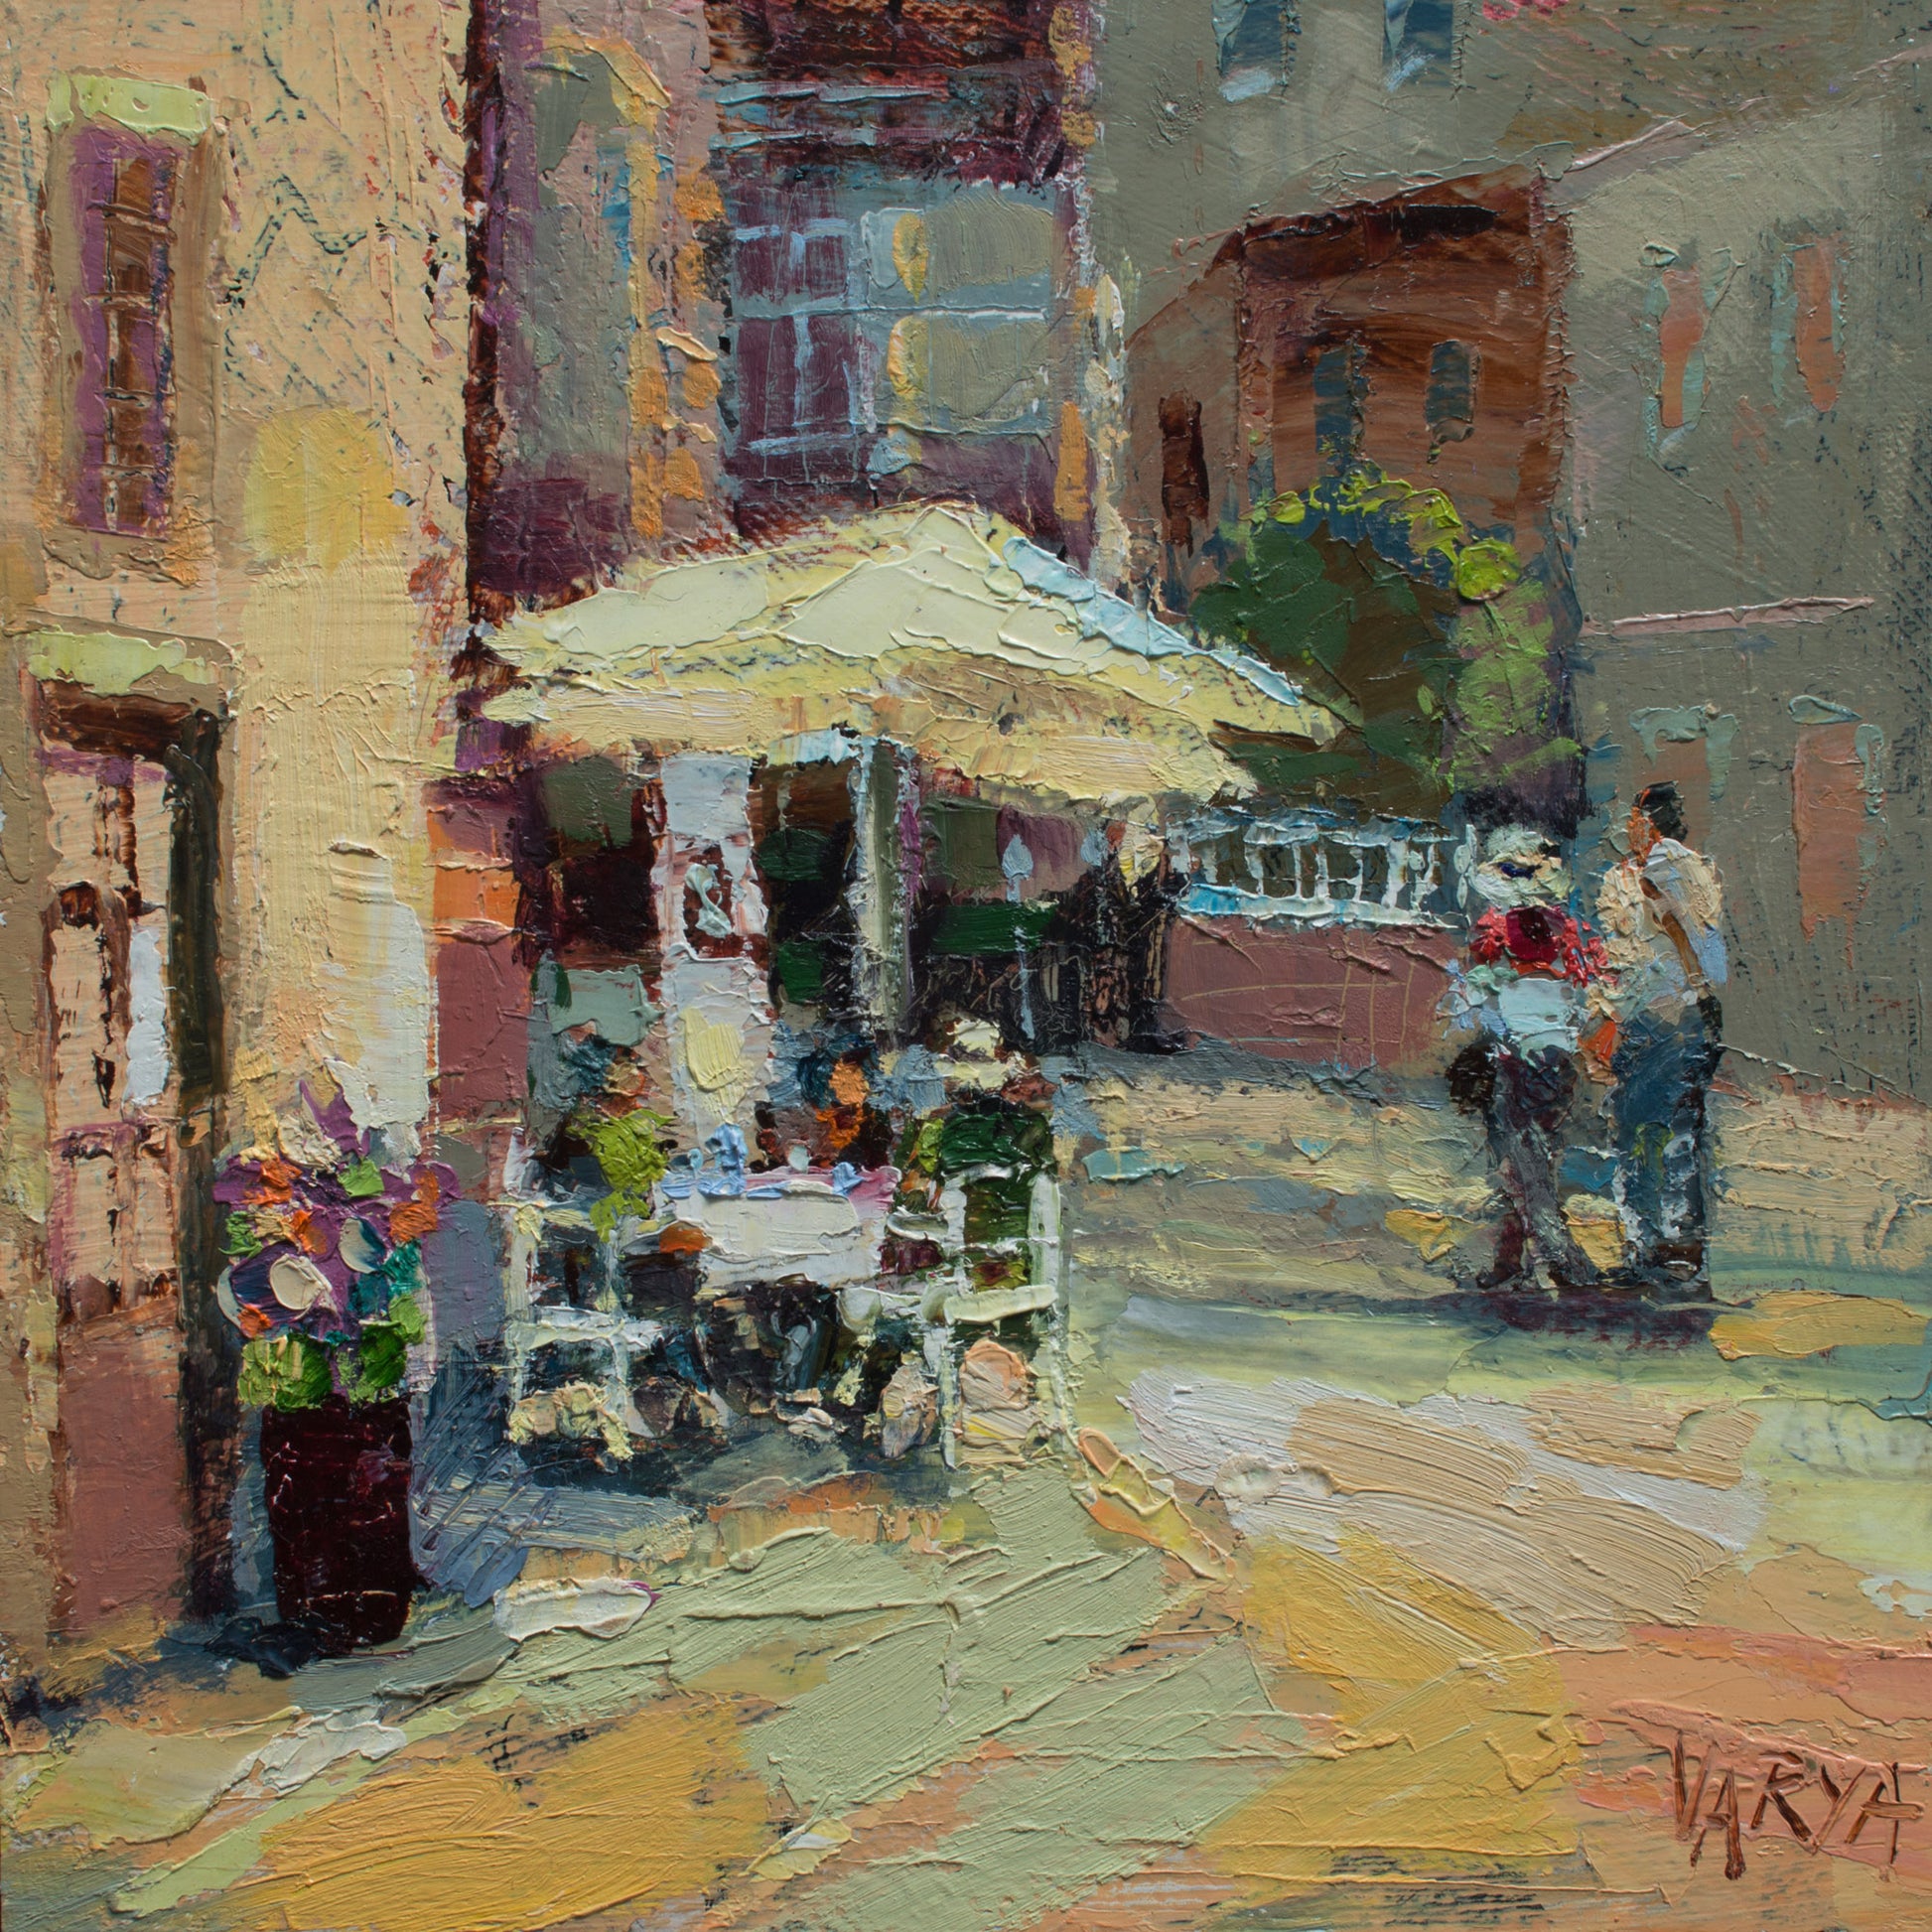 Portuguese street cafe scene painting